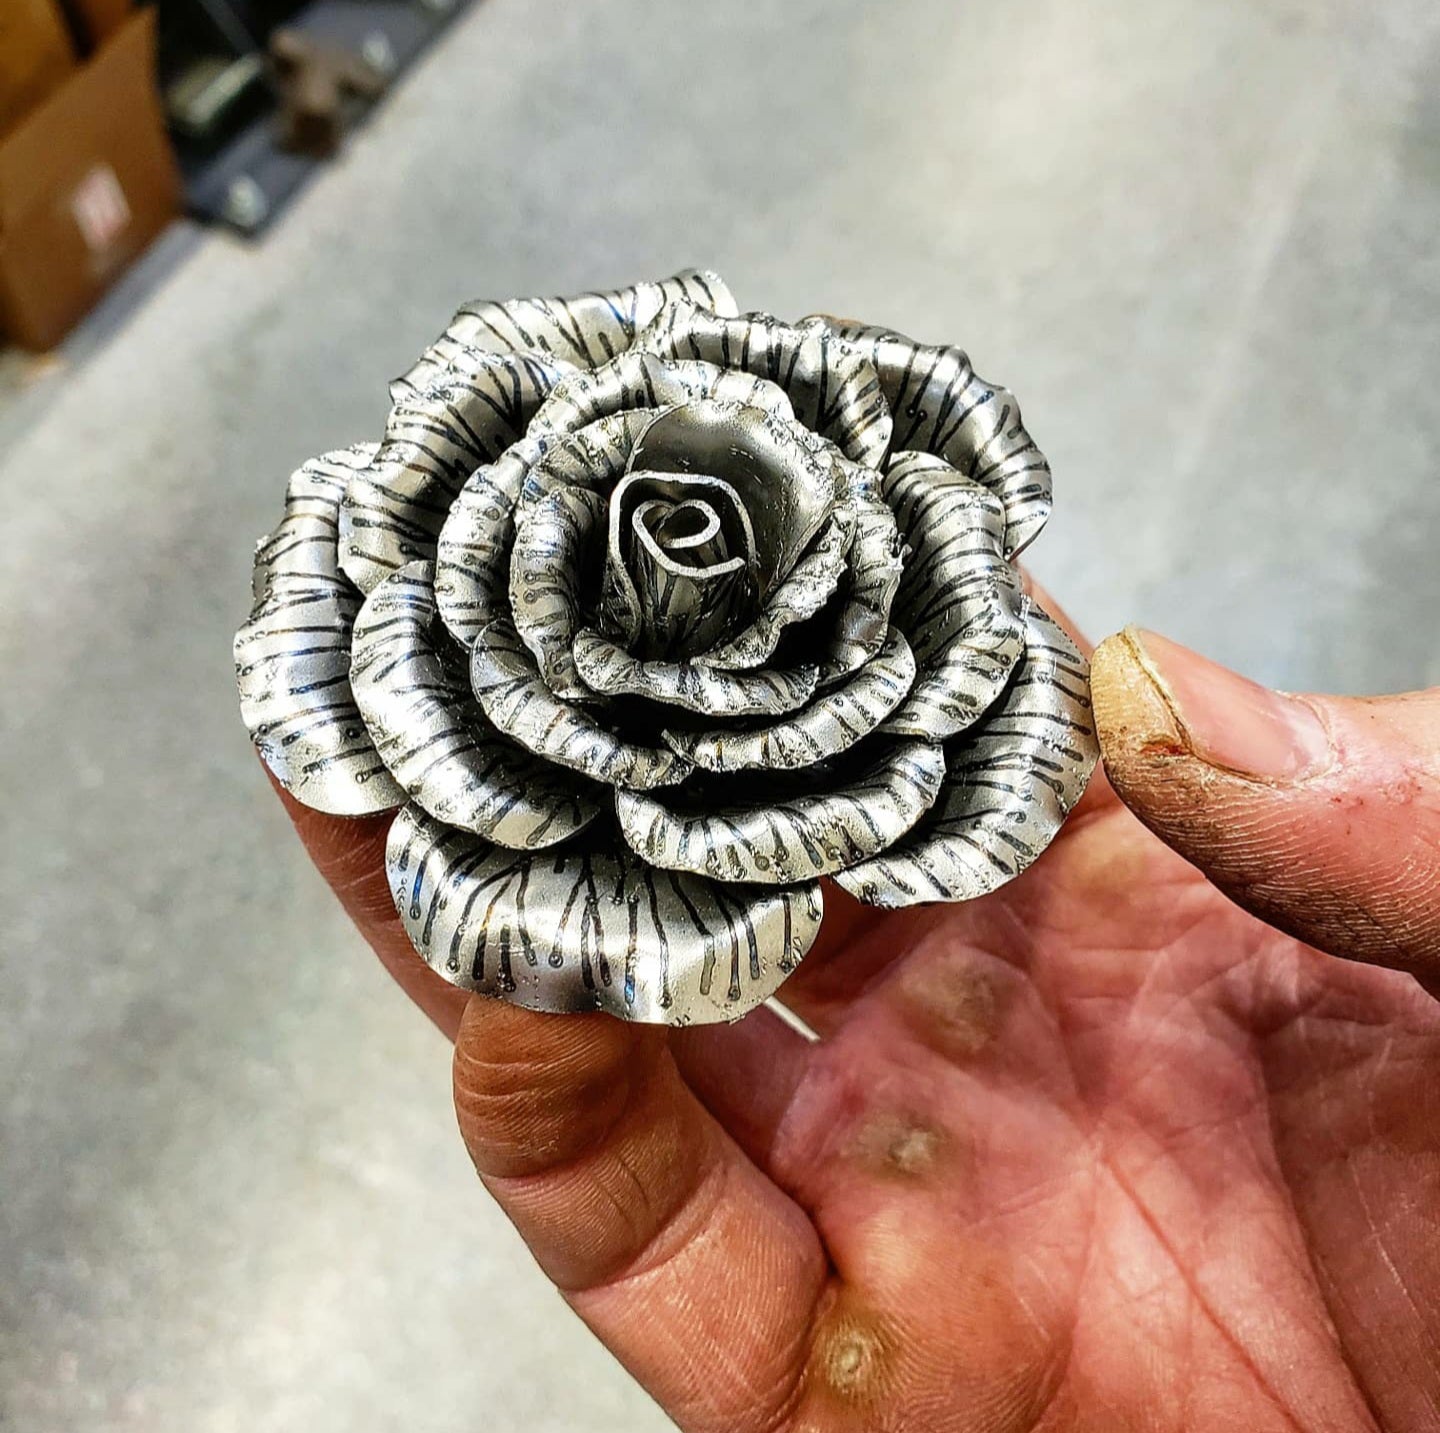 DIY "Pep" Rose Bud (No welding required) FREE SHIPPING!